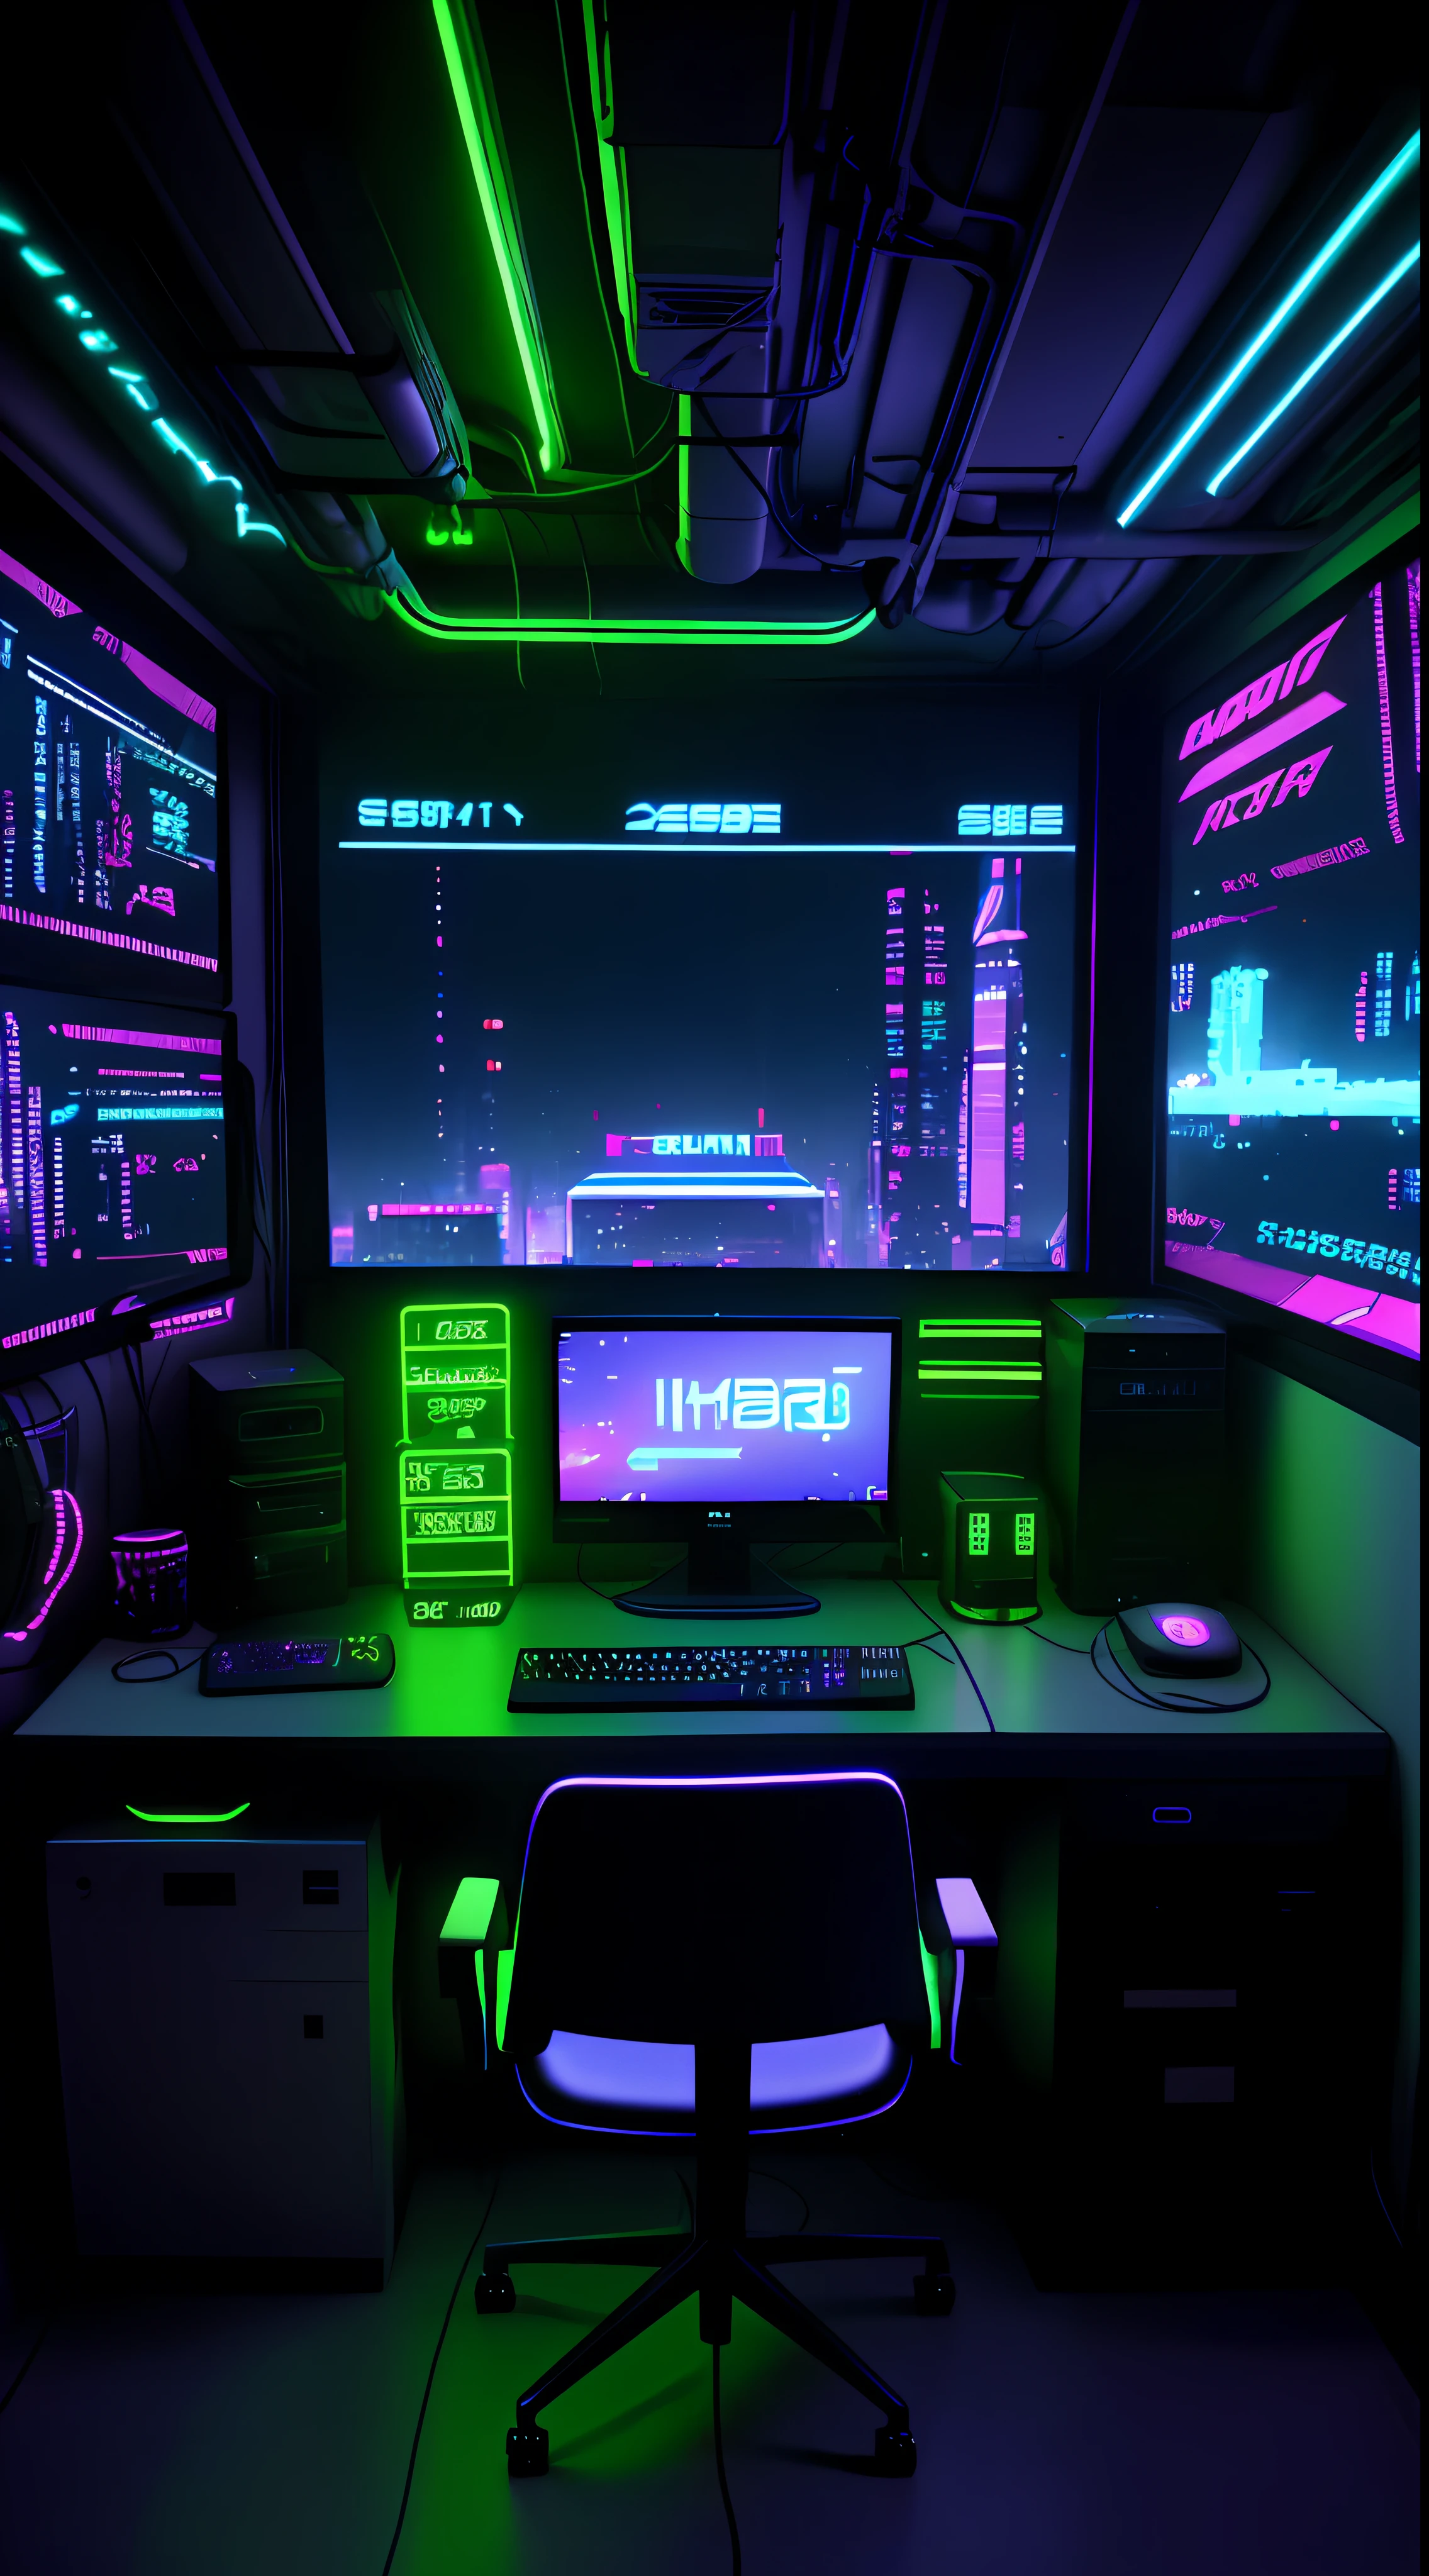 a dimly lit computer desk with multiple monitors and a keyboard, cyberpunk setting, cyber punk setting, cyber neon lighting, cyber space, cyberpunk with neon lighting, cyber neon lights, in a cyberpunk themed room, cyberpunk interior, gamer screen on metallic desk, cyber aesthetic, cyber style, sci-fi computer, cyber background, cyber installation, console and computer